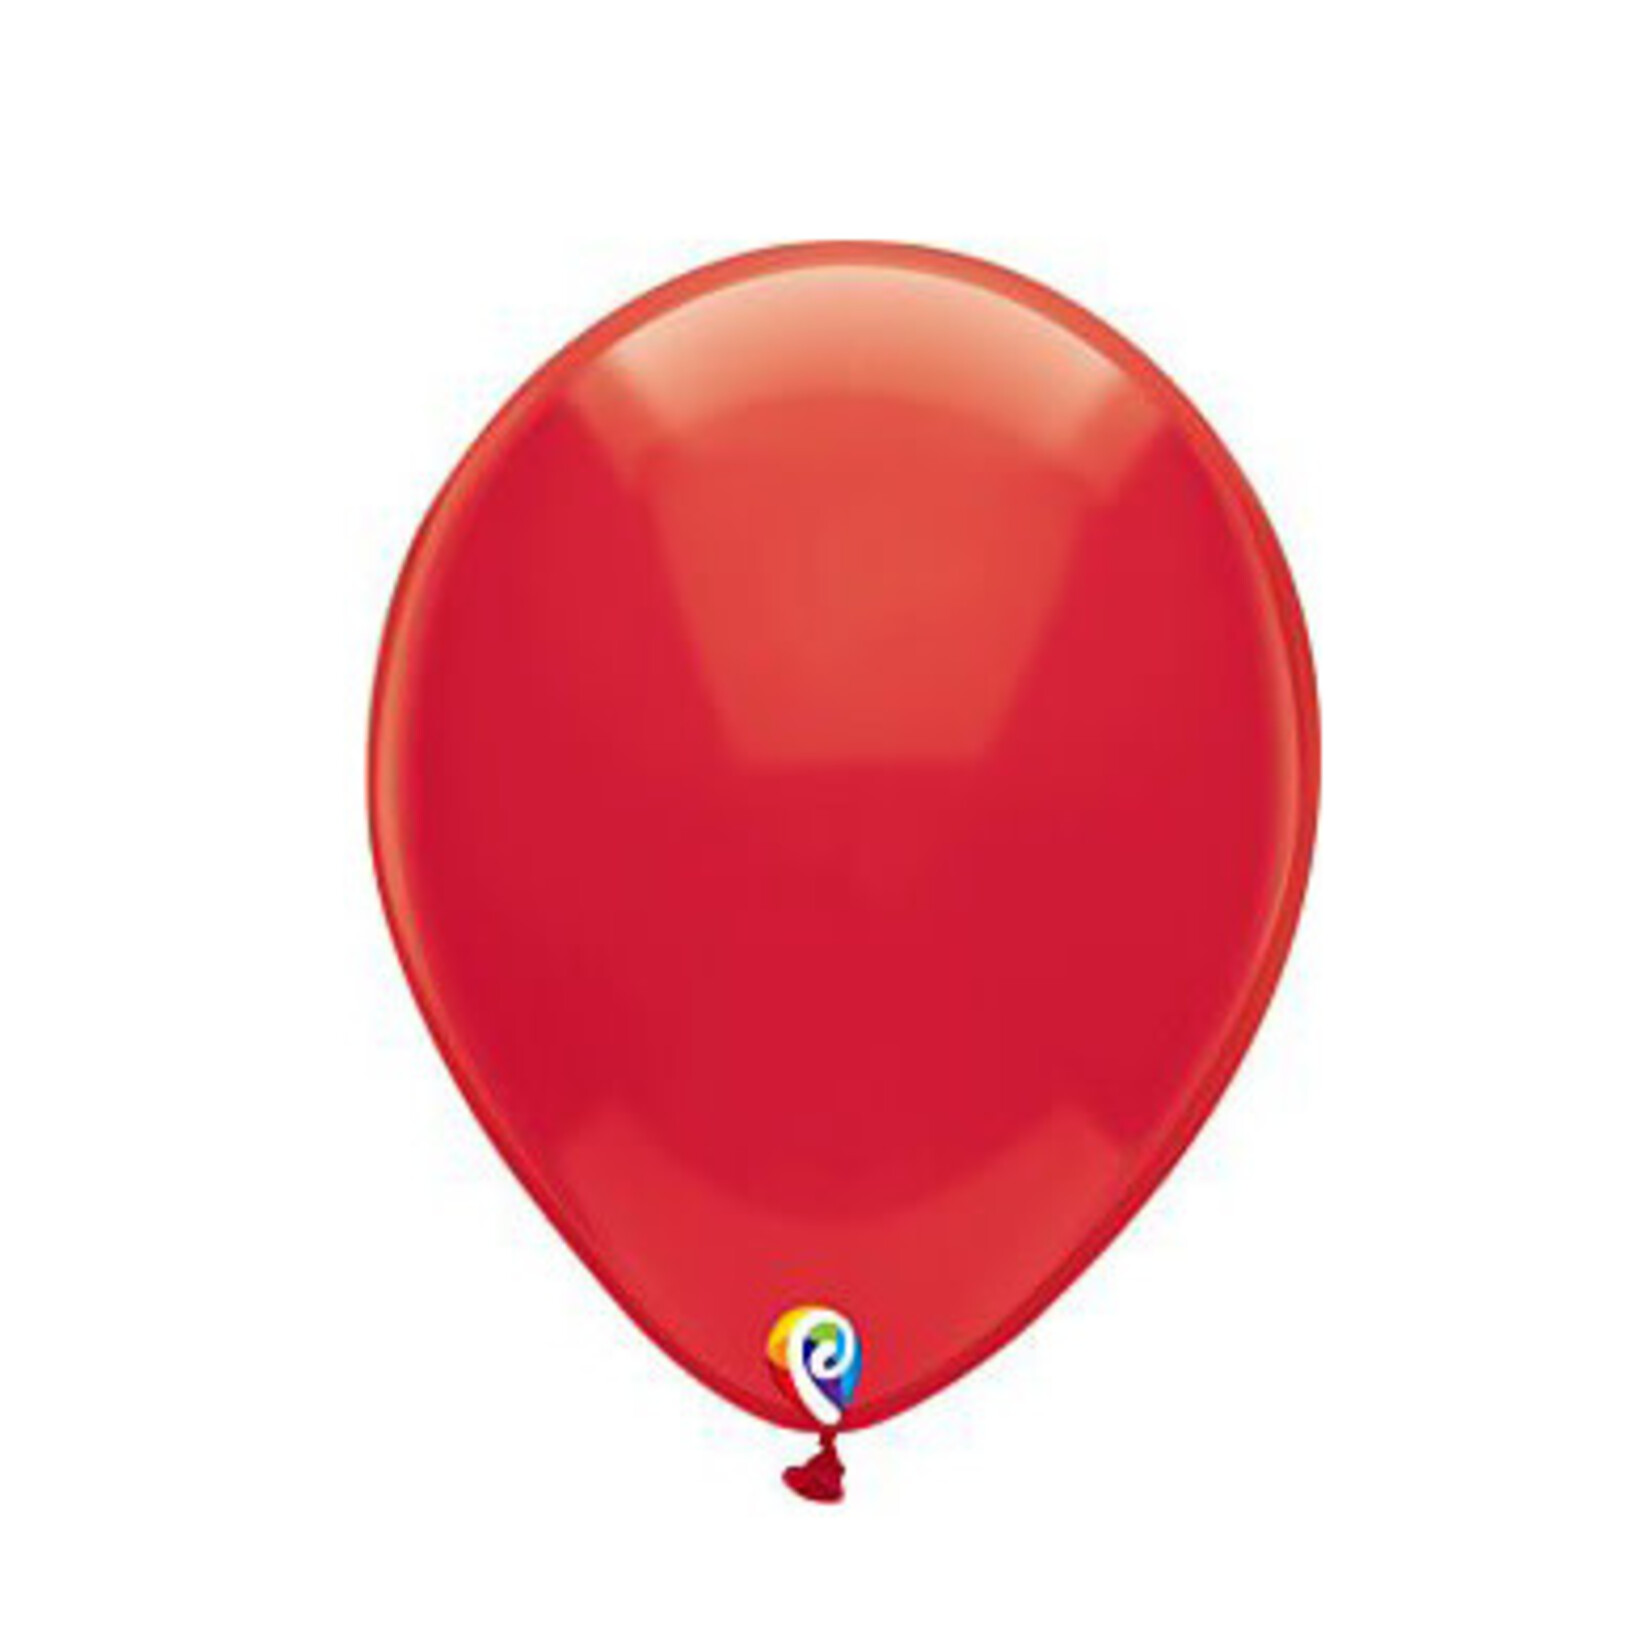 Funsational 12" Crystal Red Funsational Latex Balloons - 50ct.